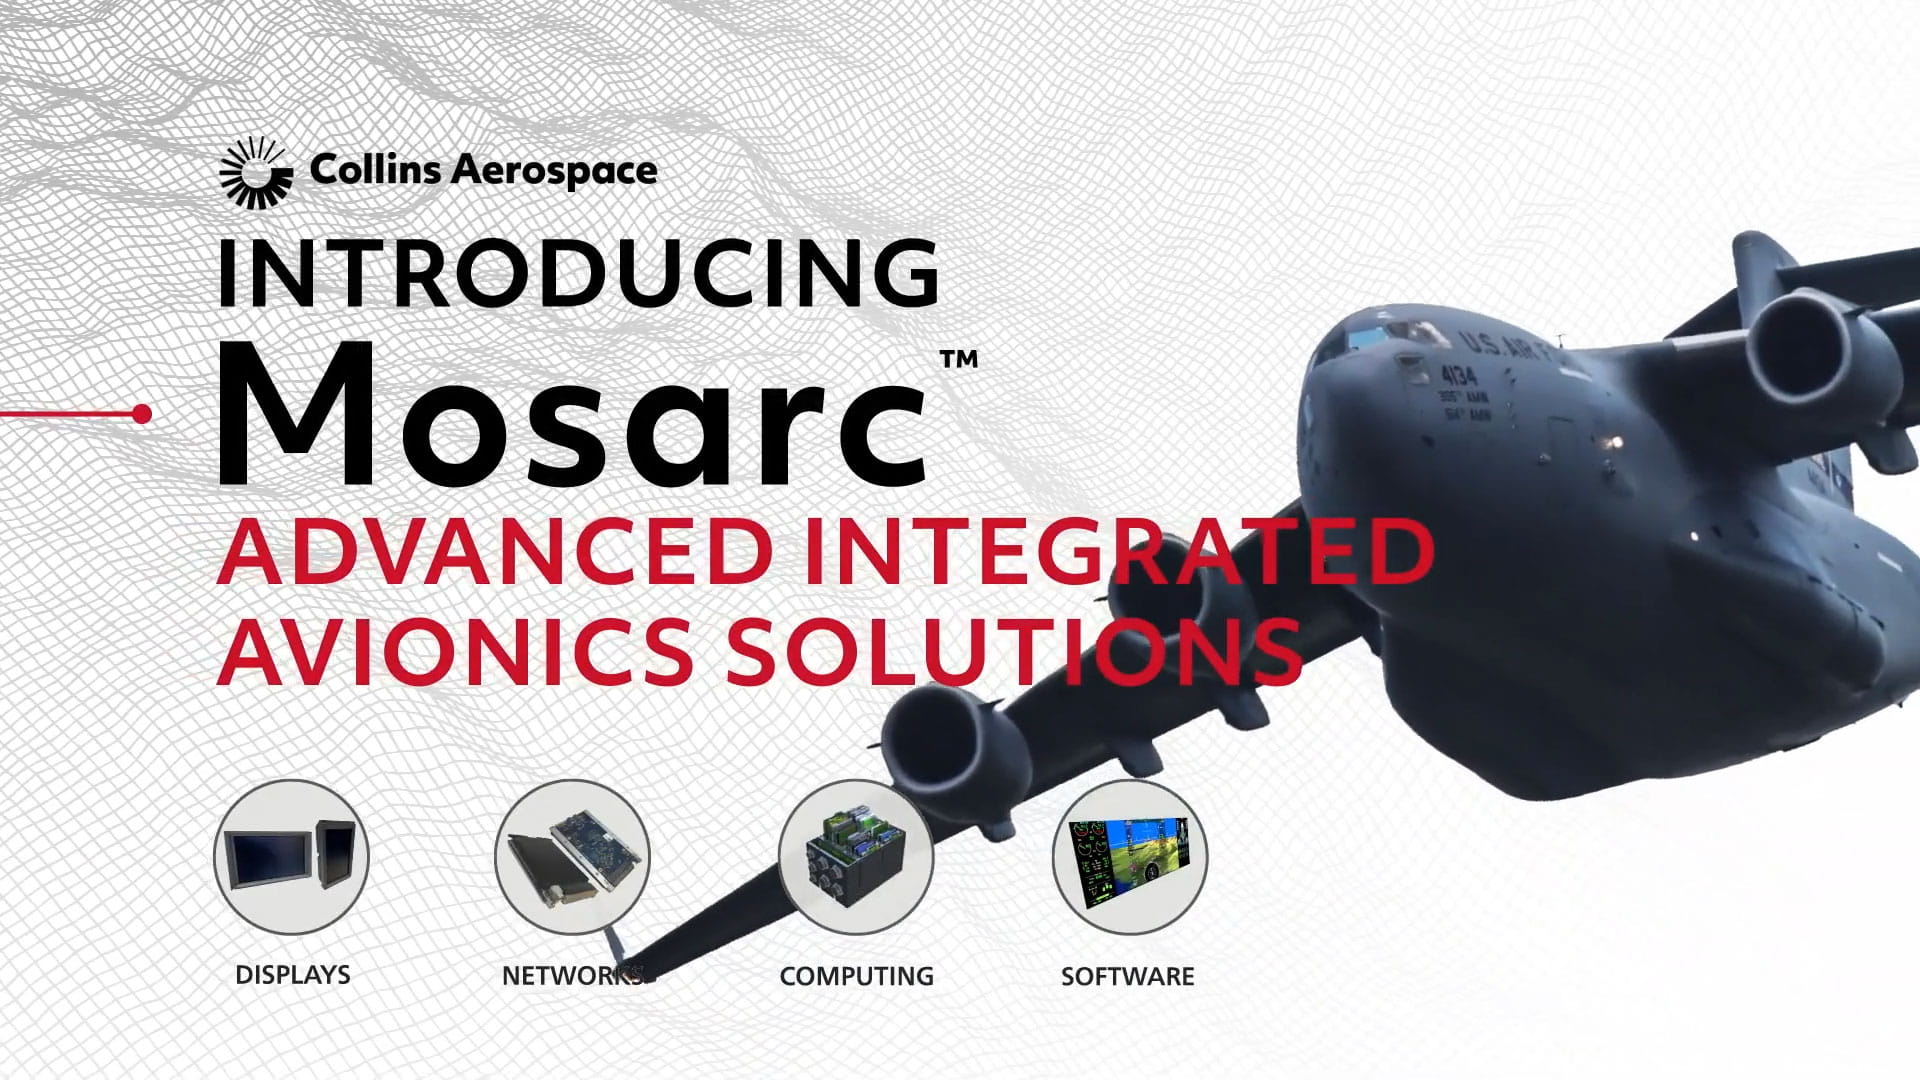 Tanker transport aircraft with the text 'Introducing Mosarc - Advanced Integrated Avionics Solutions' overlaid